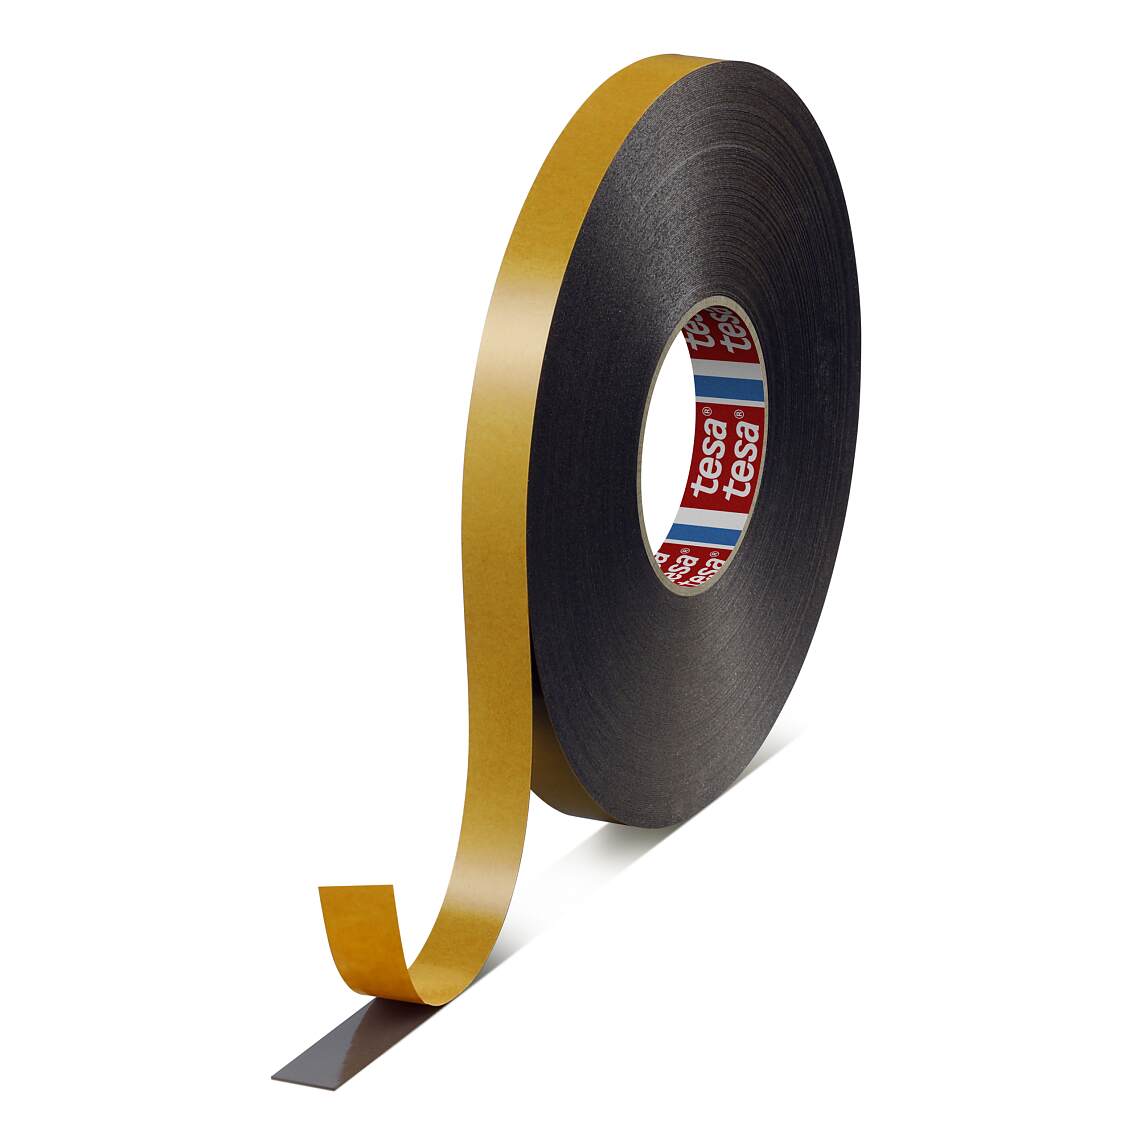 Permanent And Removable Double Sided Adhesive Foam Tapes For Mirror Mounting Tesa Global Adhesive Tape Manufacturer